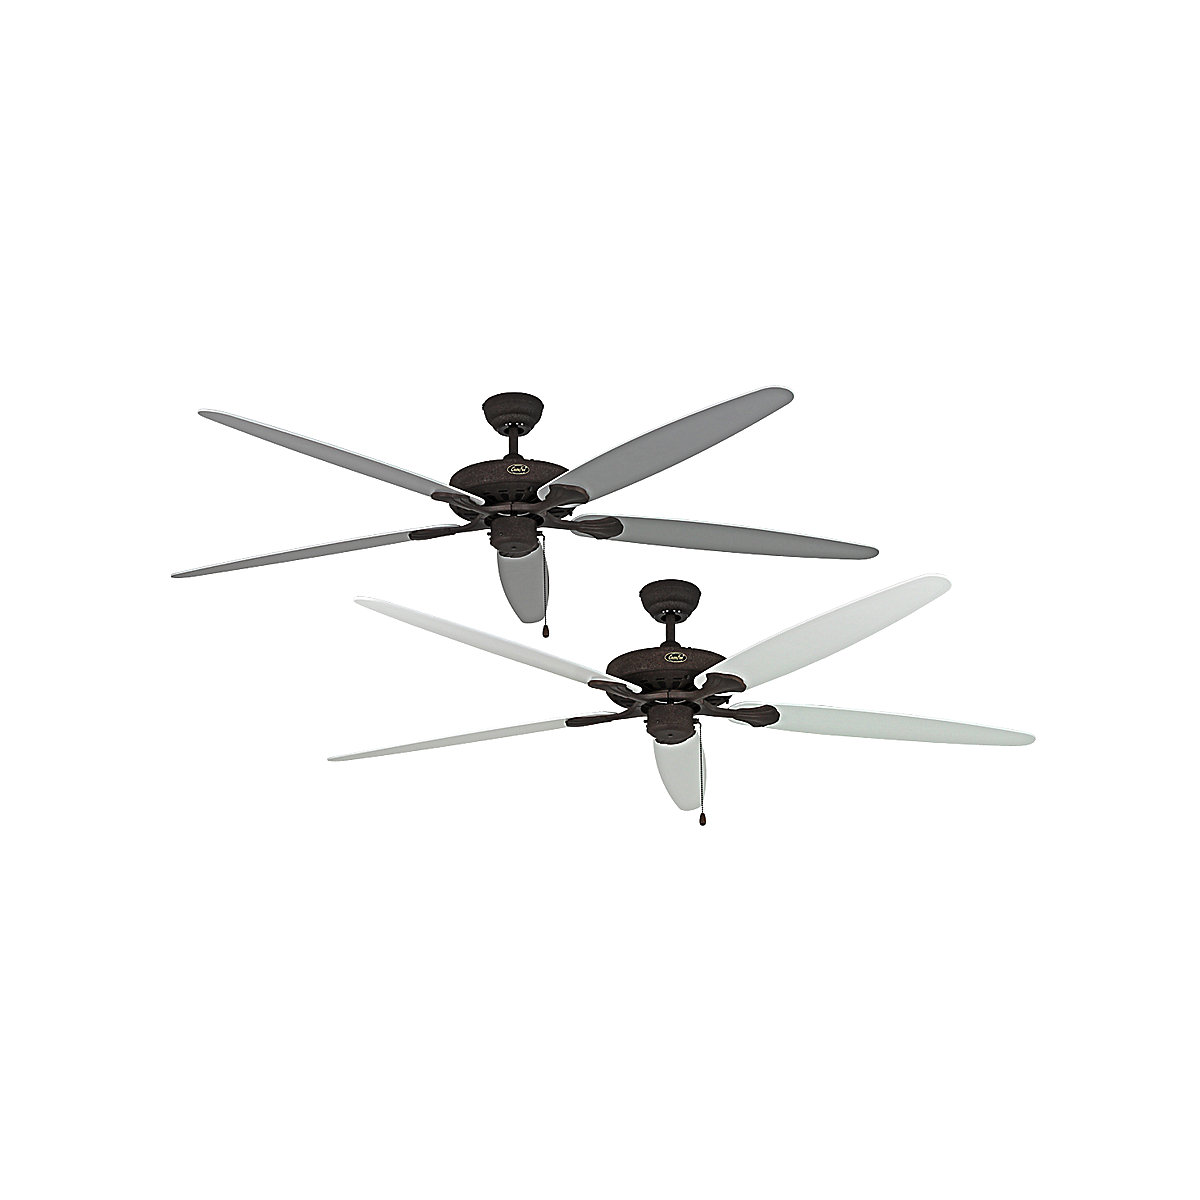 CLASSIC ROYAL ceiling fan, rotor blade Ø 1800 mm, painted white / painted light grey / antique brown / bronze-6